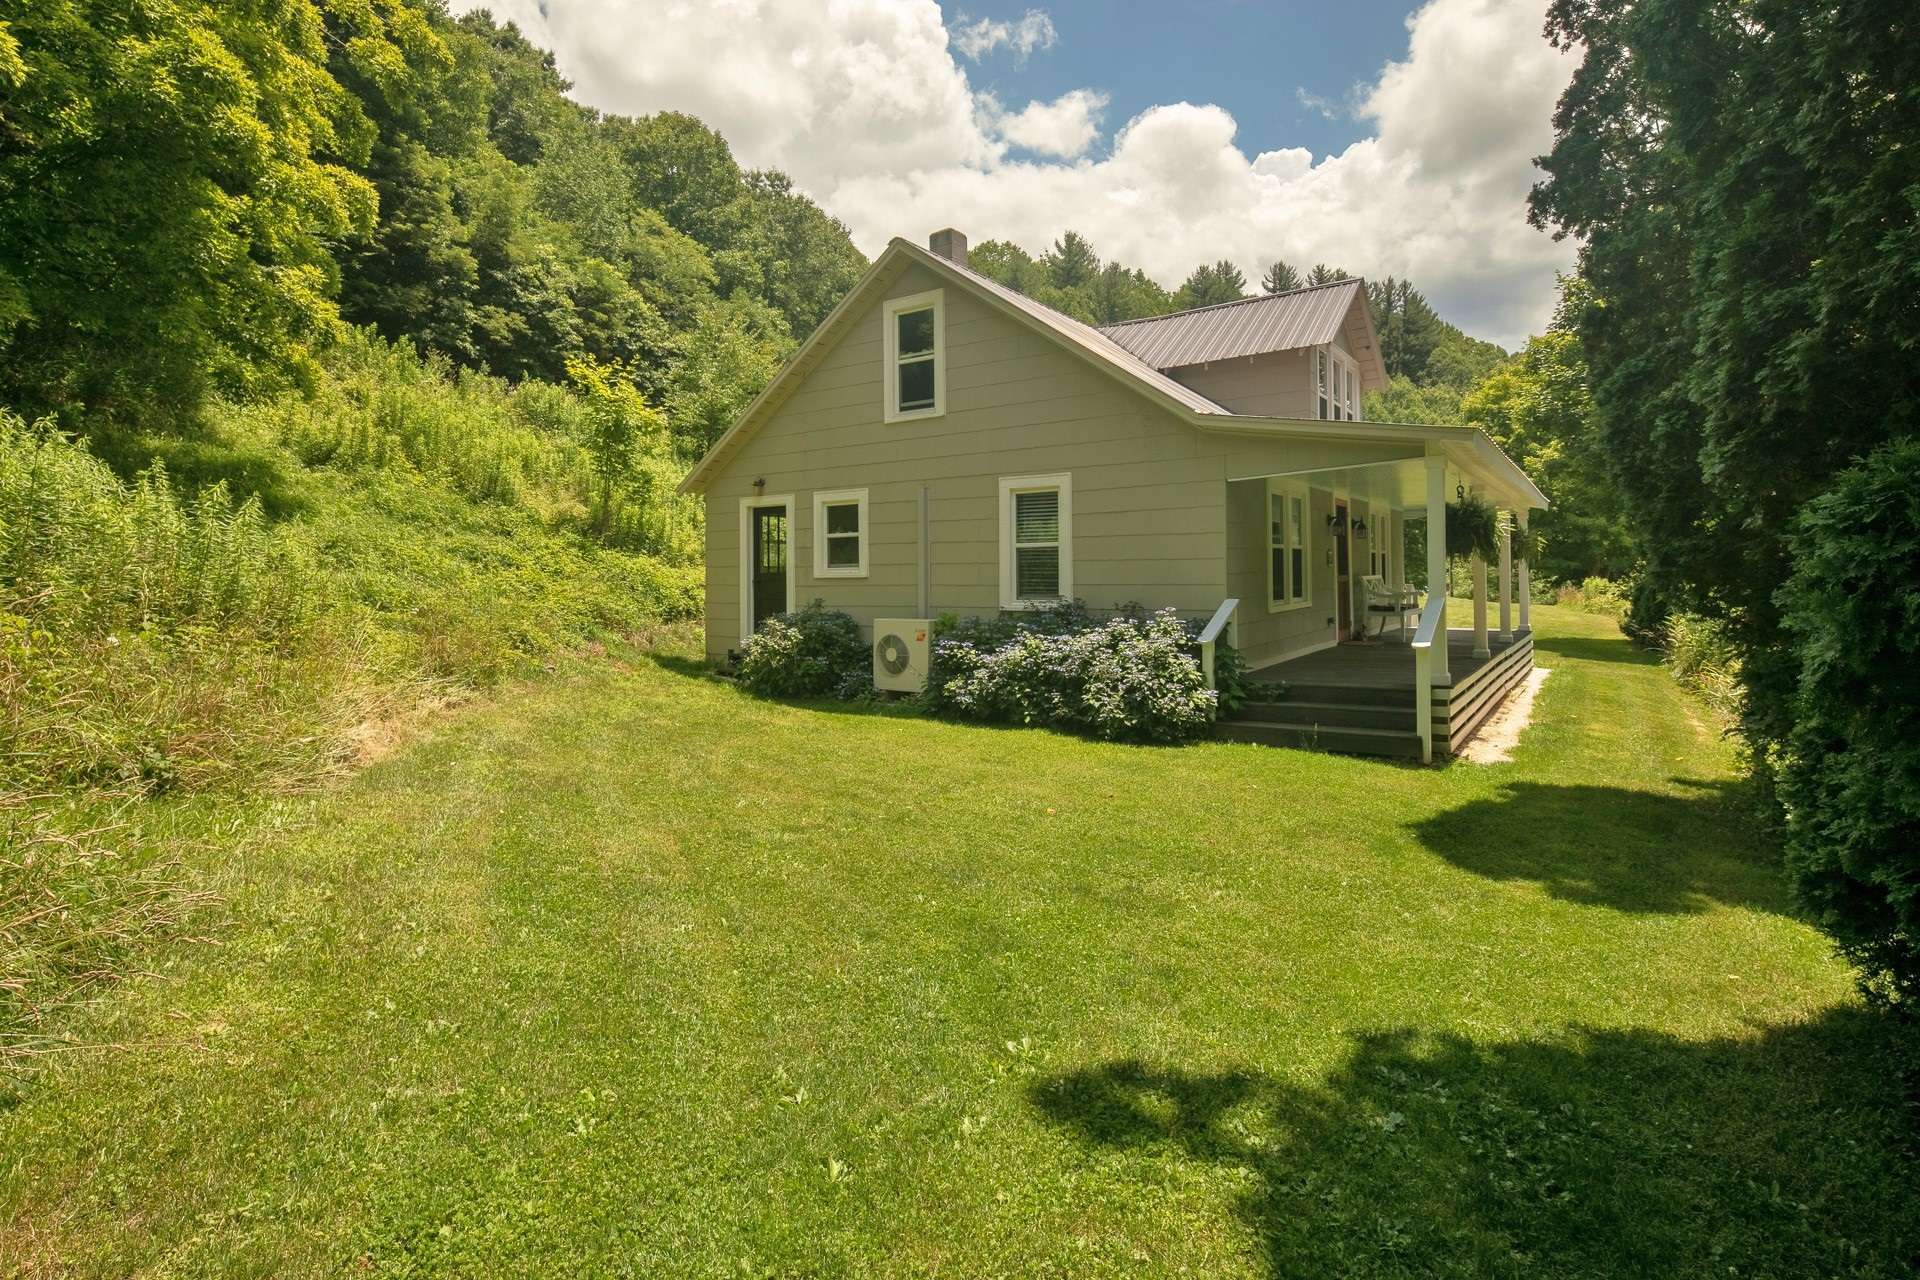 Ideal for guests,  extended family, short or long term rental, this cozy farmhouse is located within walking distance of main house.